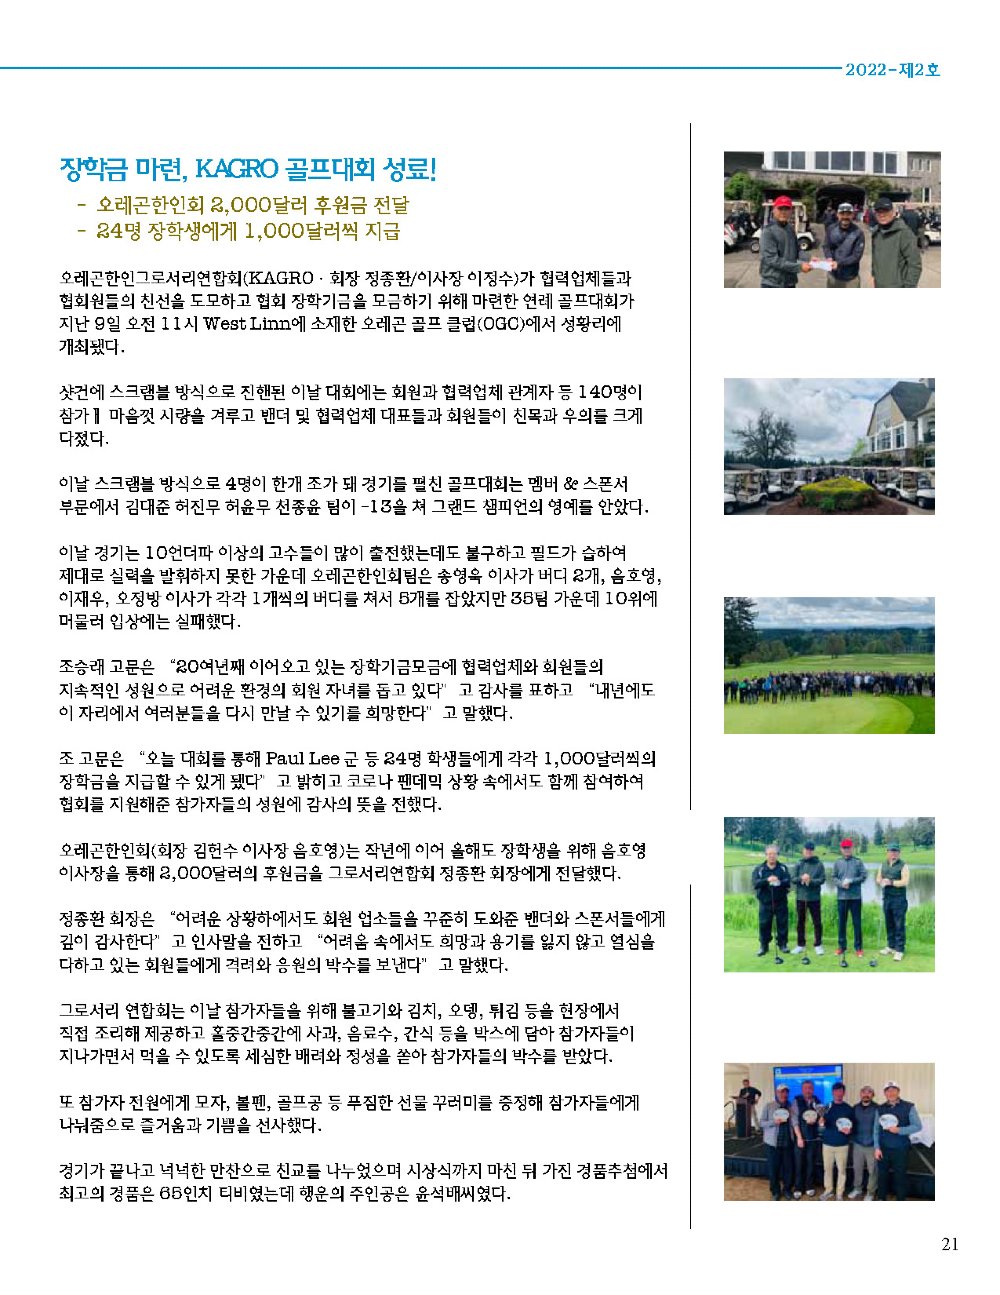 KSO News paper_2022_Page_21.jpg